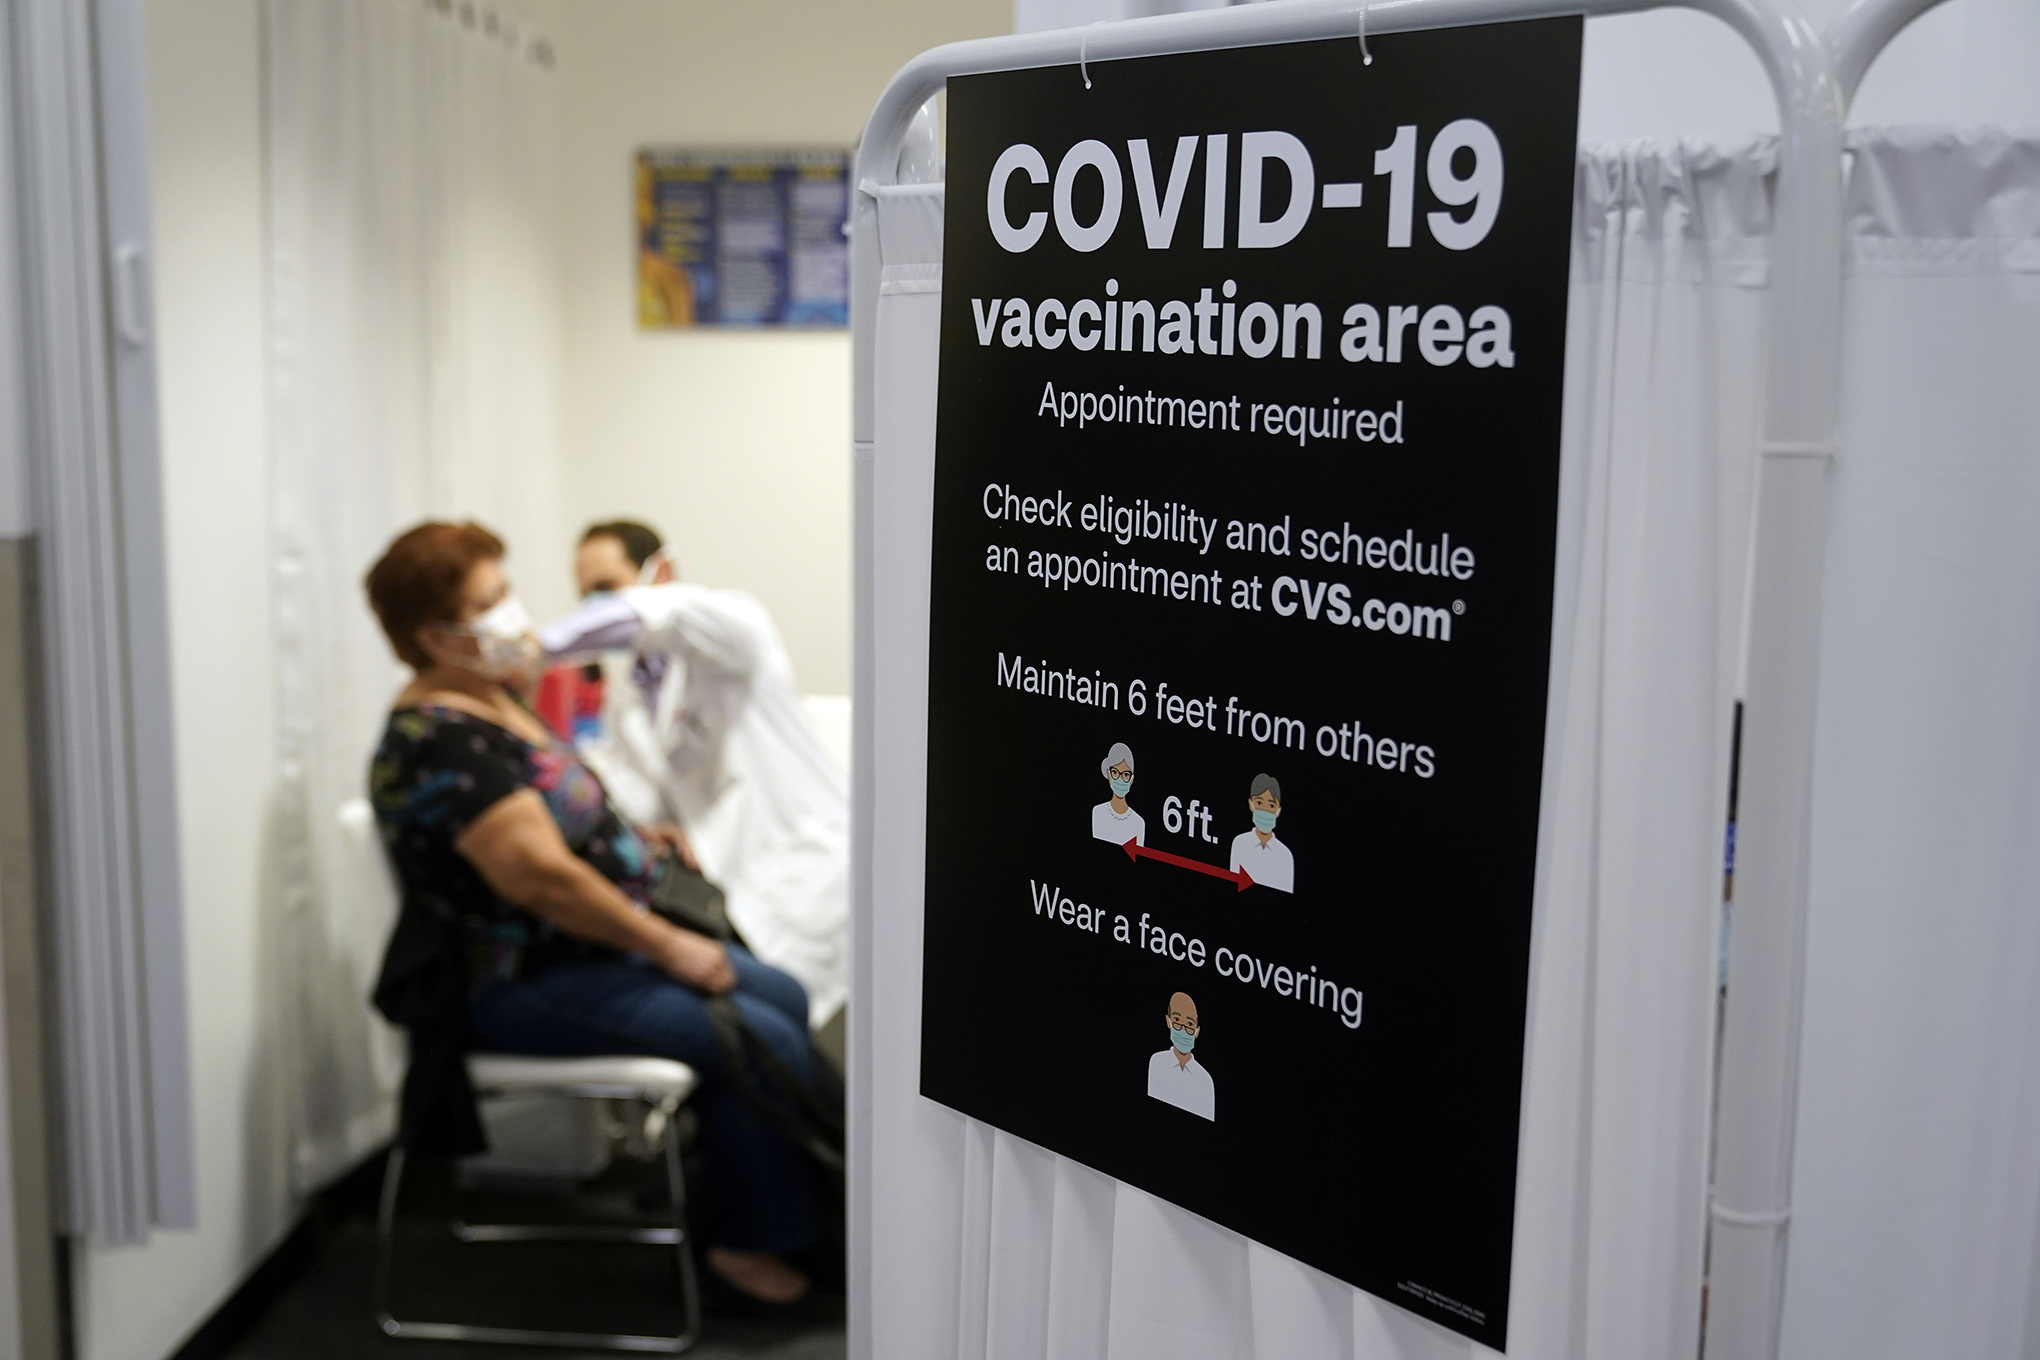 What You Need To Know About Mammograms And The COVID-19 Vaccine